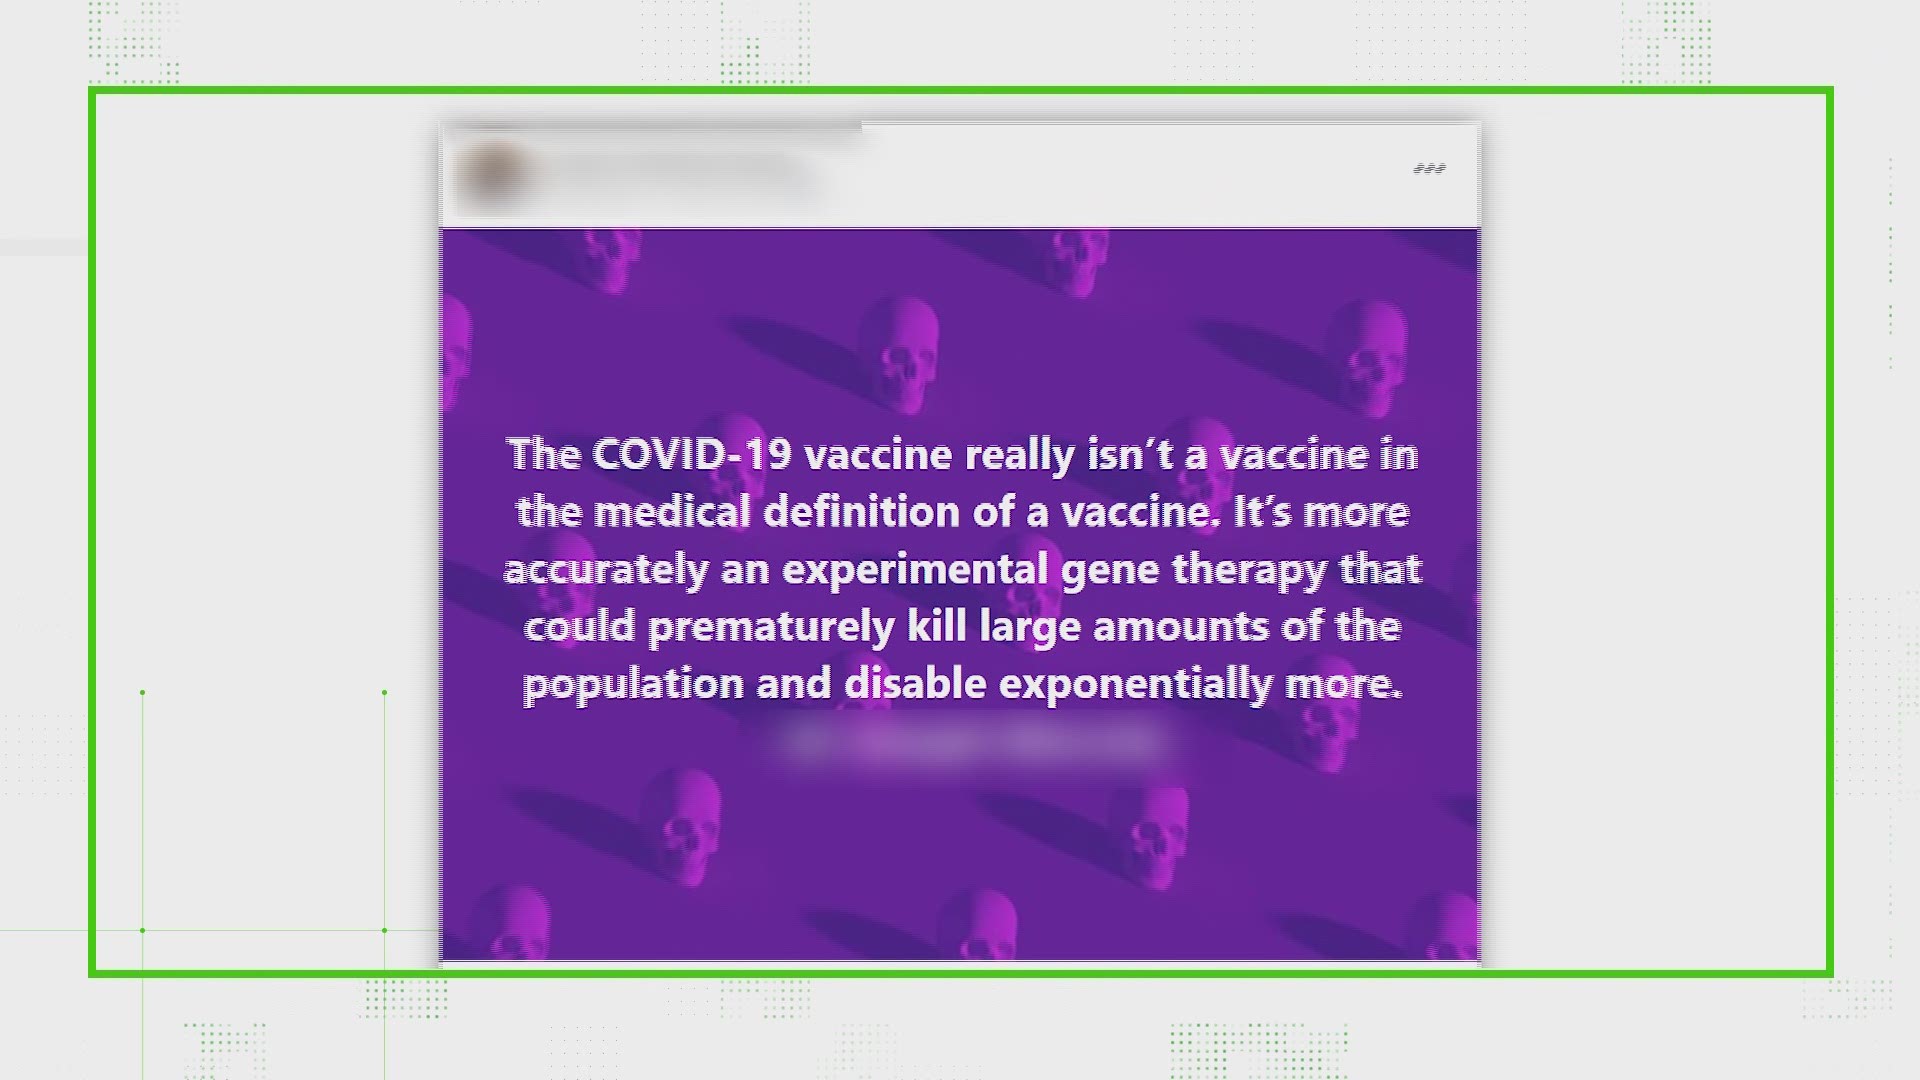 Misinformation around the COVID-19 vaccines has claimed they're not real vaccines and that they can alter your DNA. That's false.